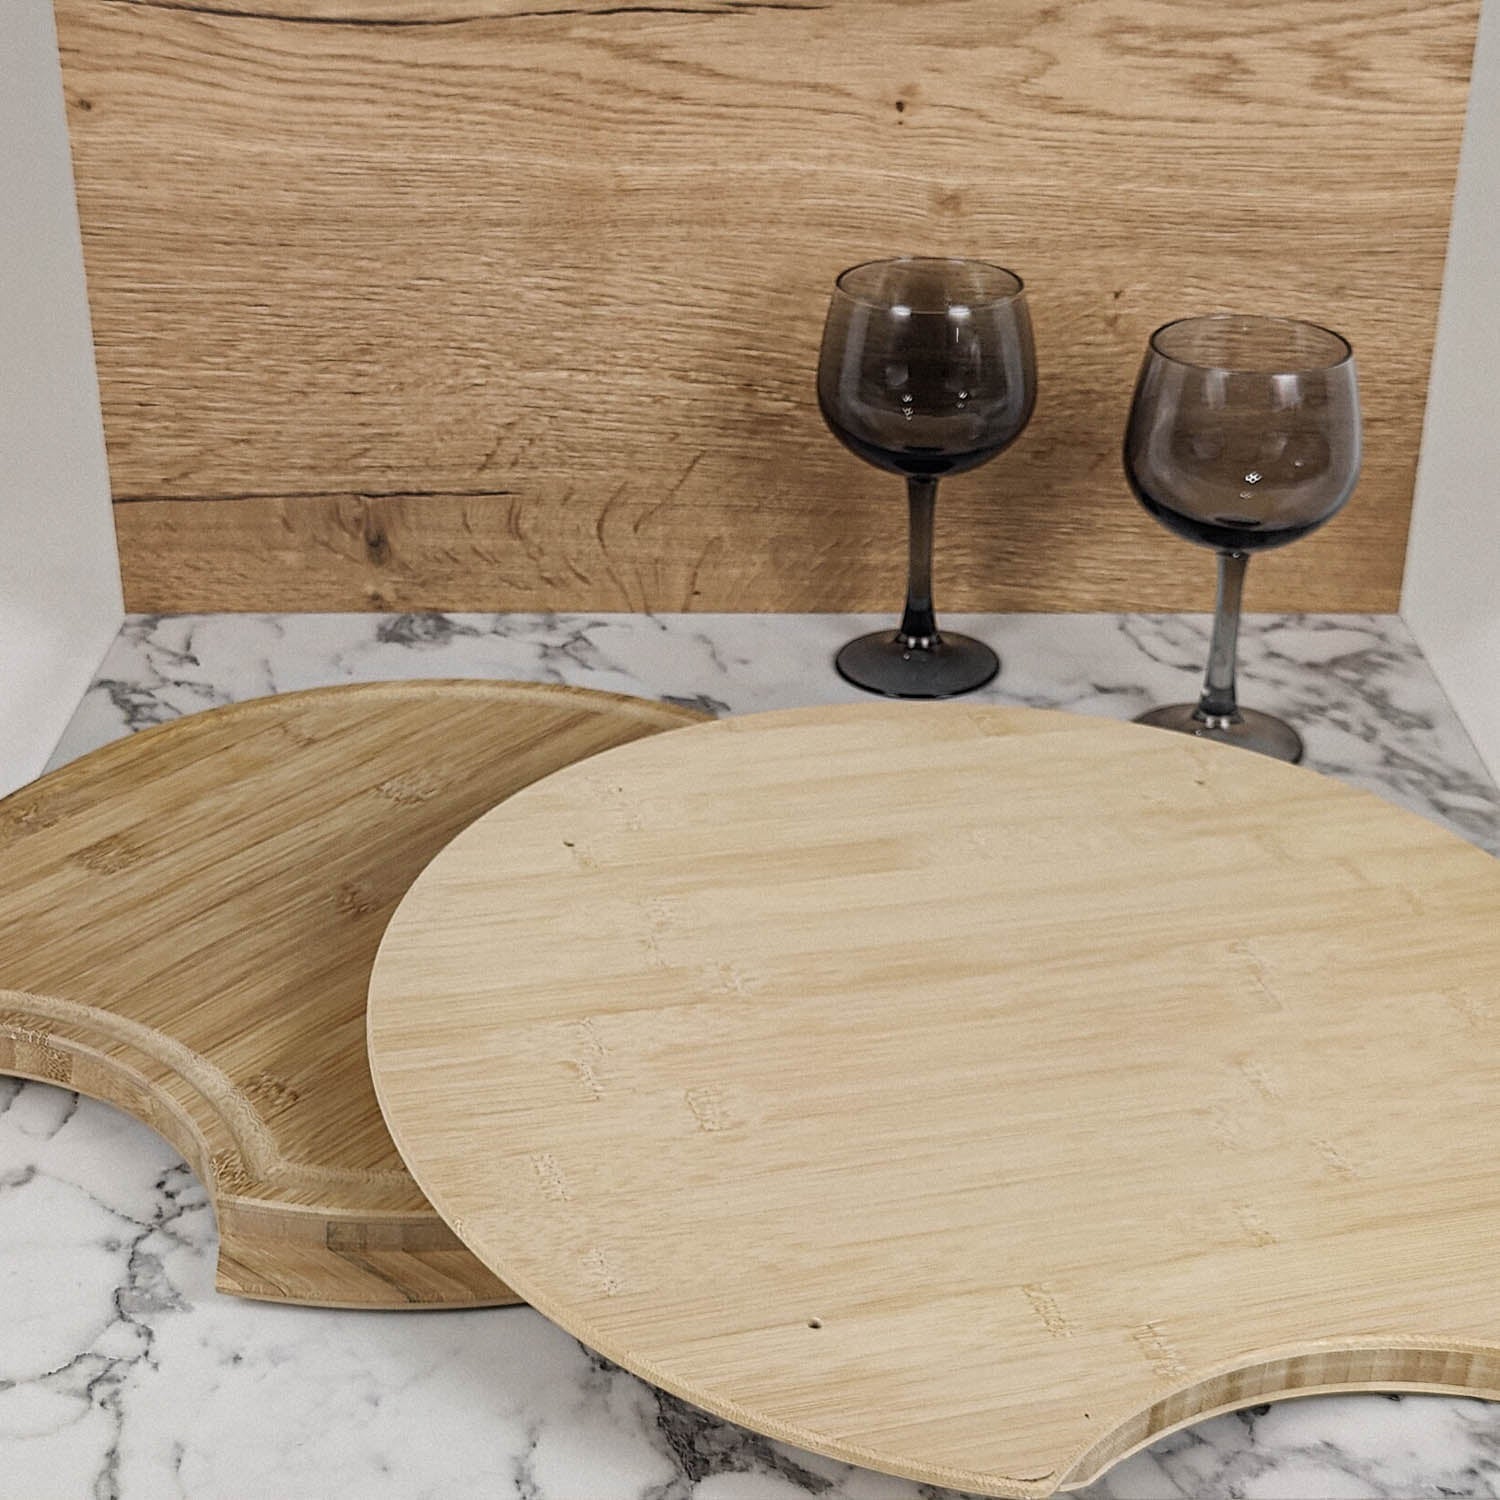 Cutting board with sink cover for Carado models